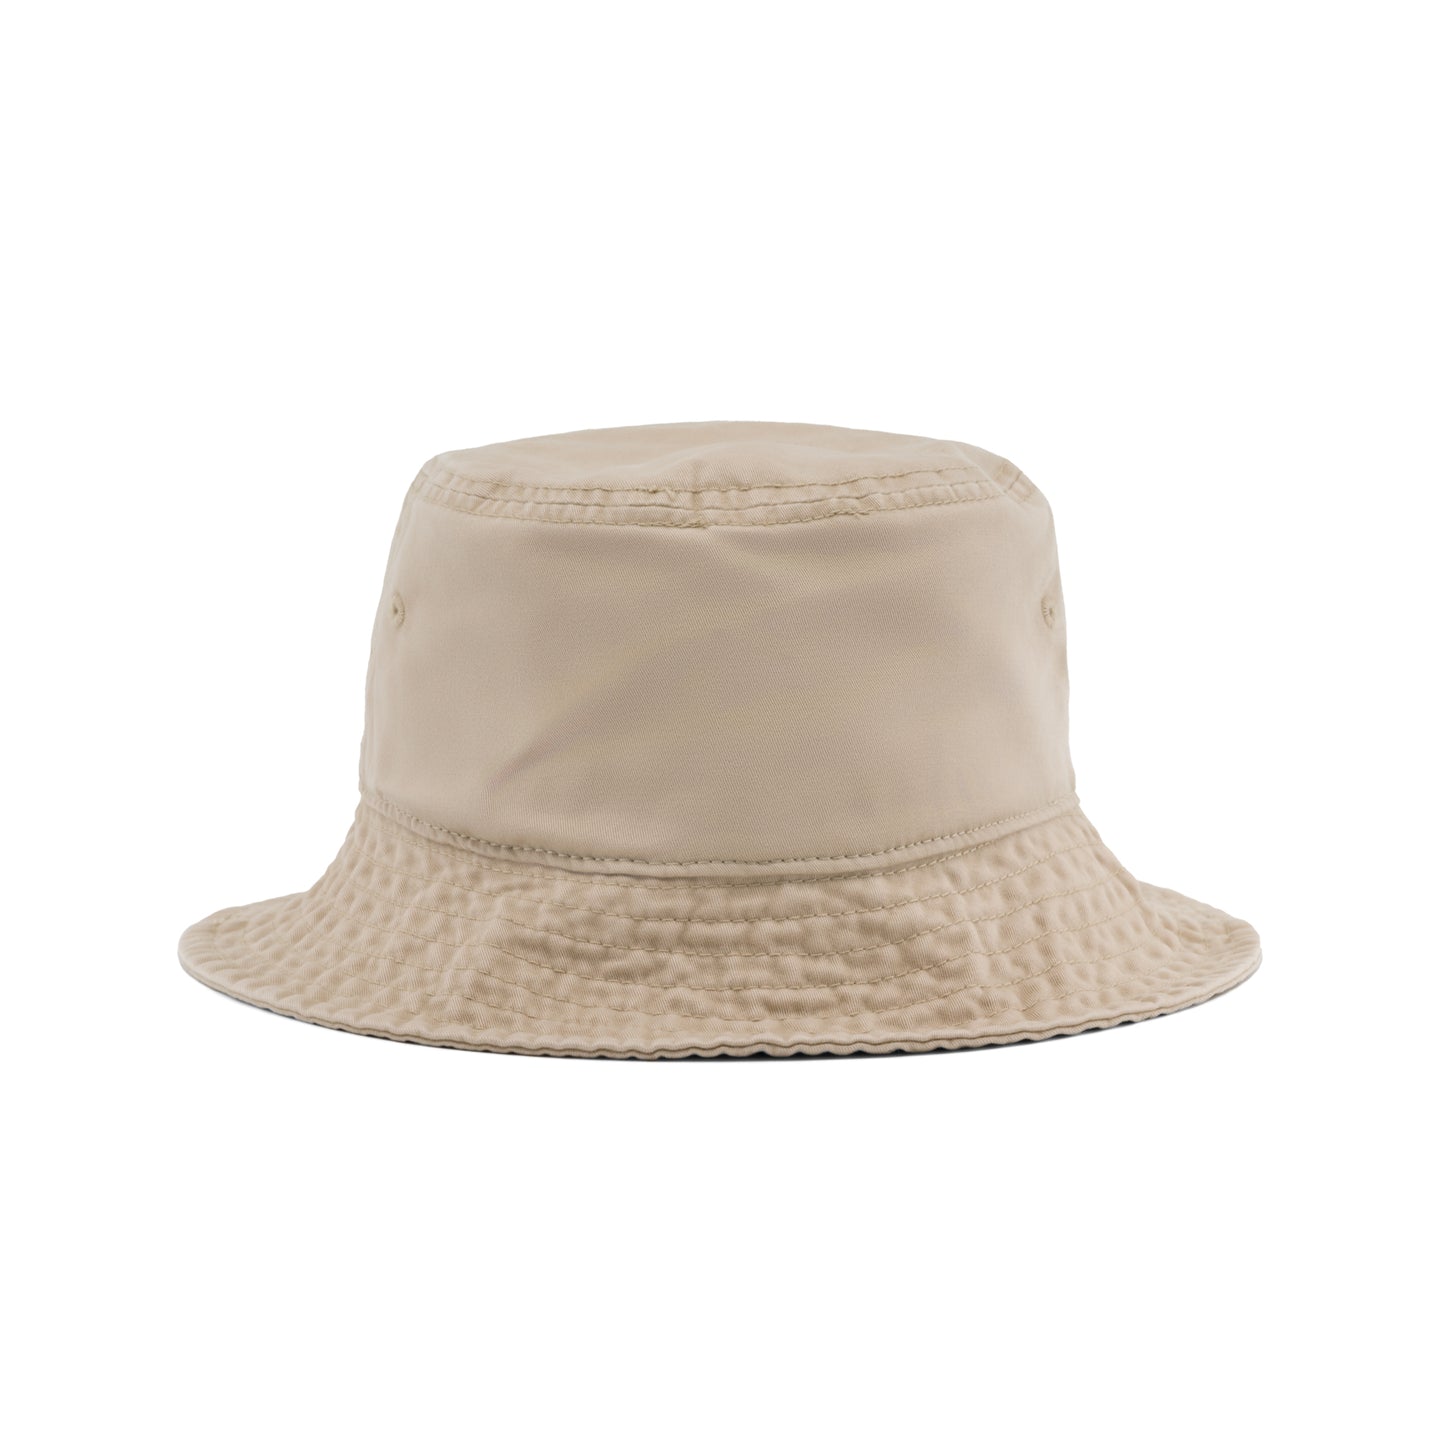 Concepts Intl 1996 Bucket Hat (Washed Taupe)